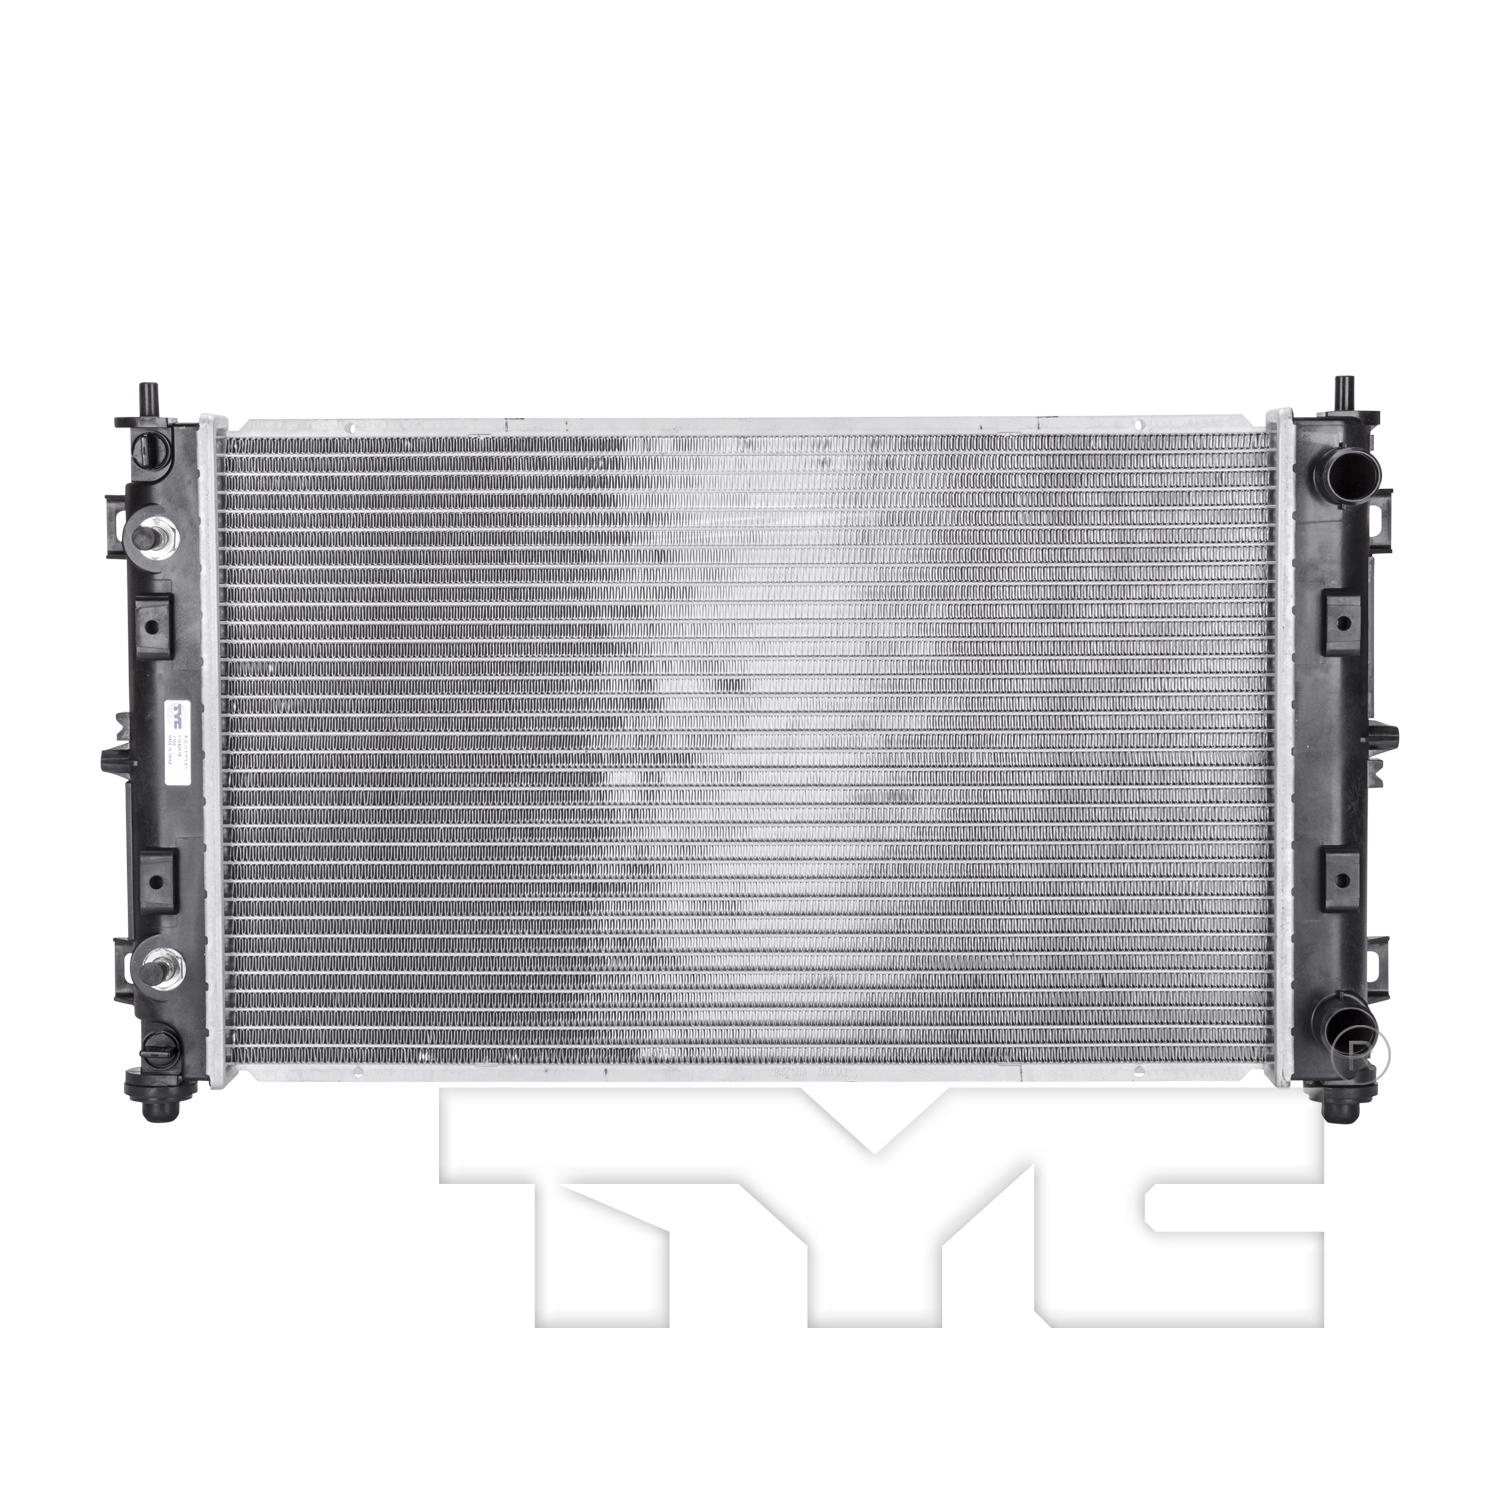 Aftermarket RADIATORS for PLYMOUTH - BREEZE, BREEZE,96-99,Radiator assembly